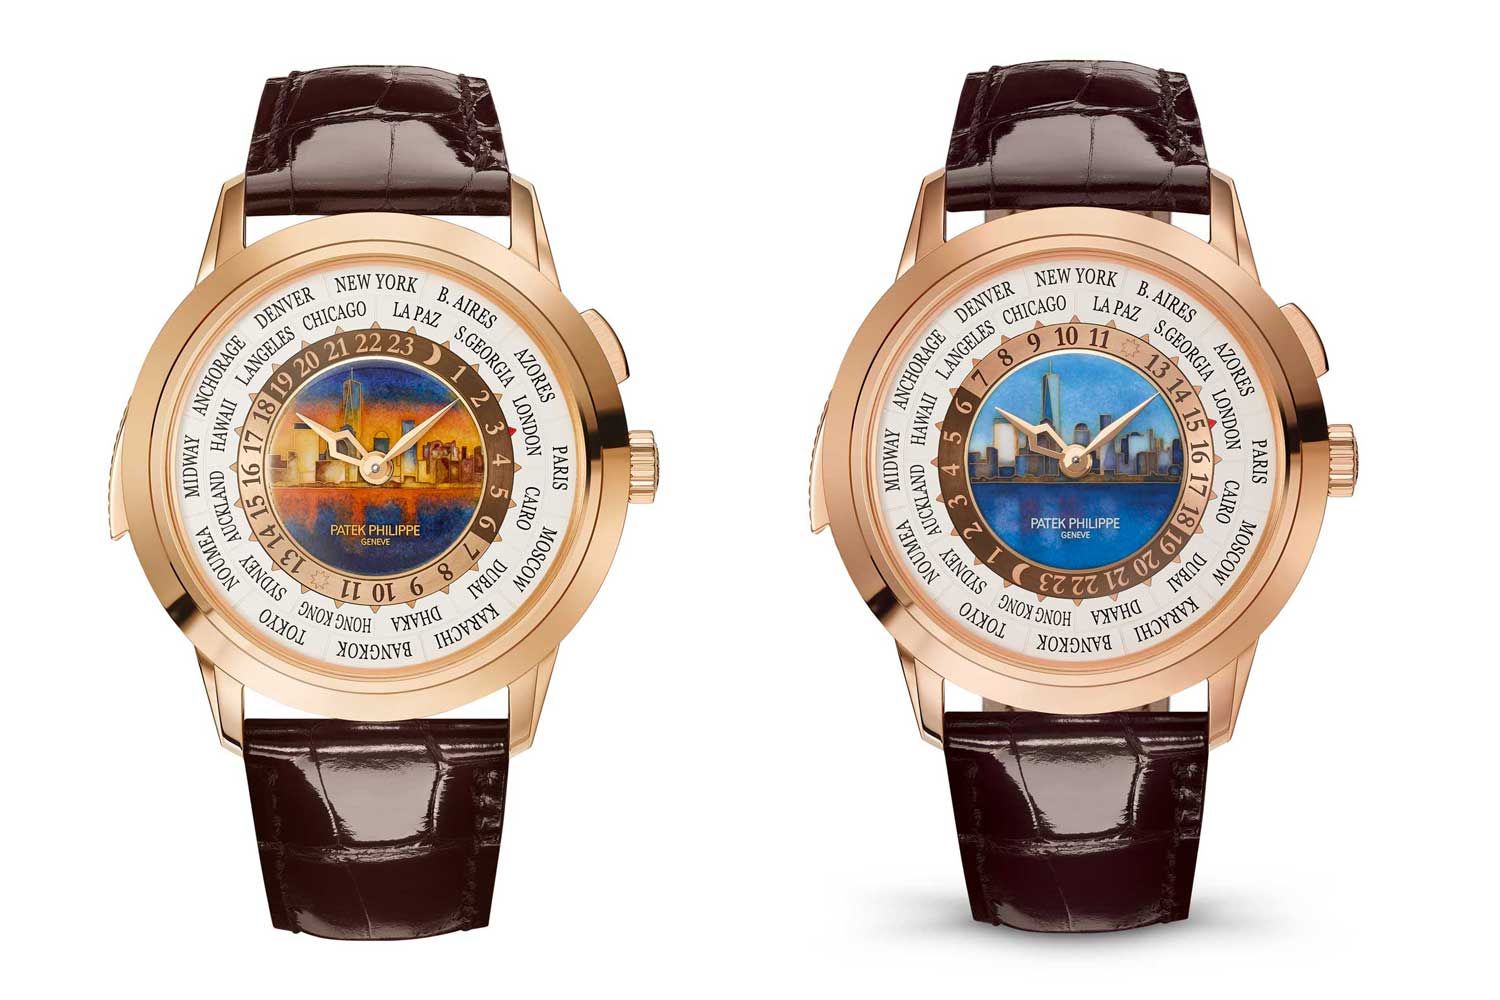 The first execution of the 5531R depicting Manhattan’s skyline was made with two dial designs “New York by Day” and “New York by Night” in 2017